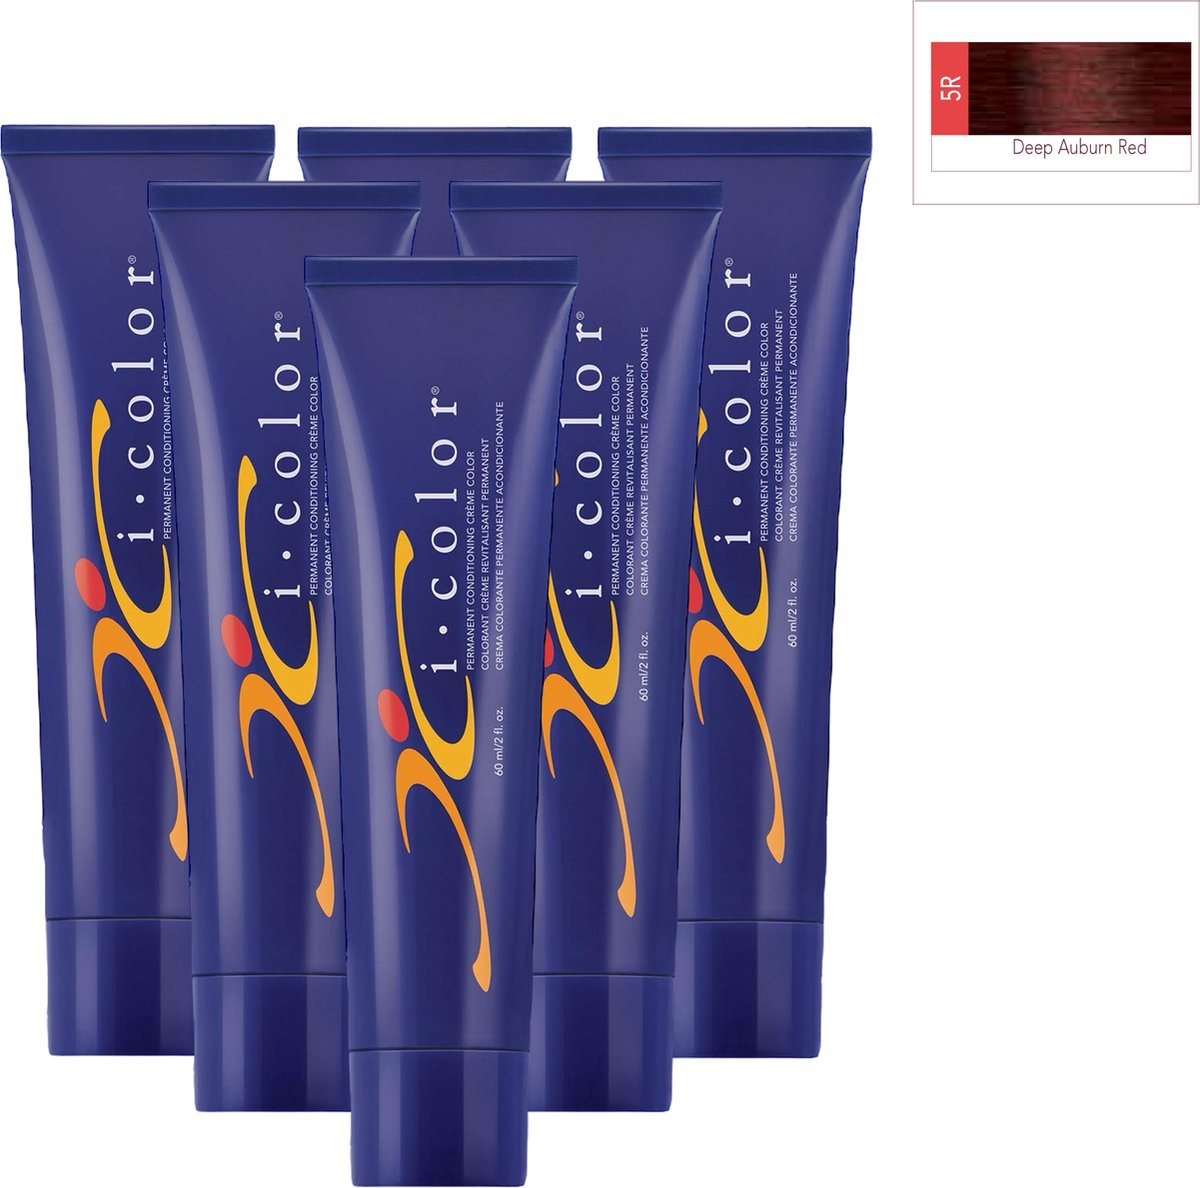 ISO i color Permanent Conditioning Crème Color 60ml 5R (5.5) Deep Auburn Red x 6 tubes